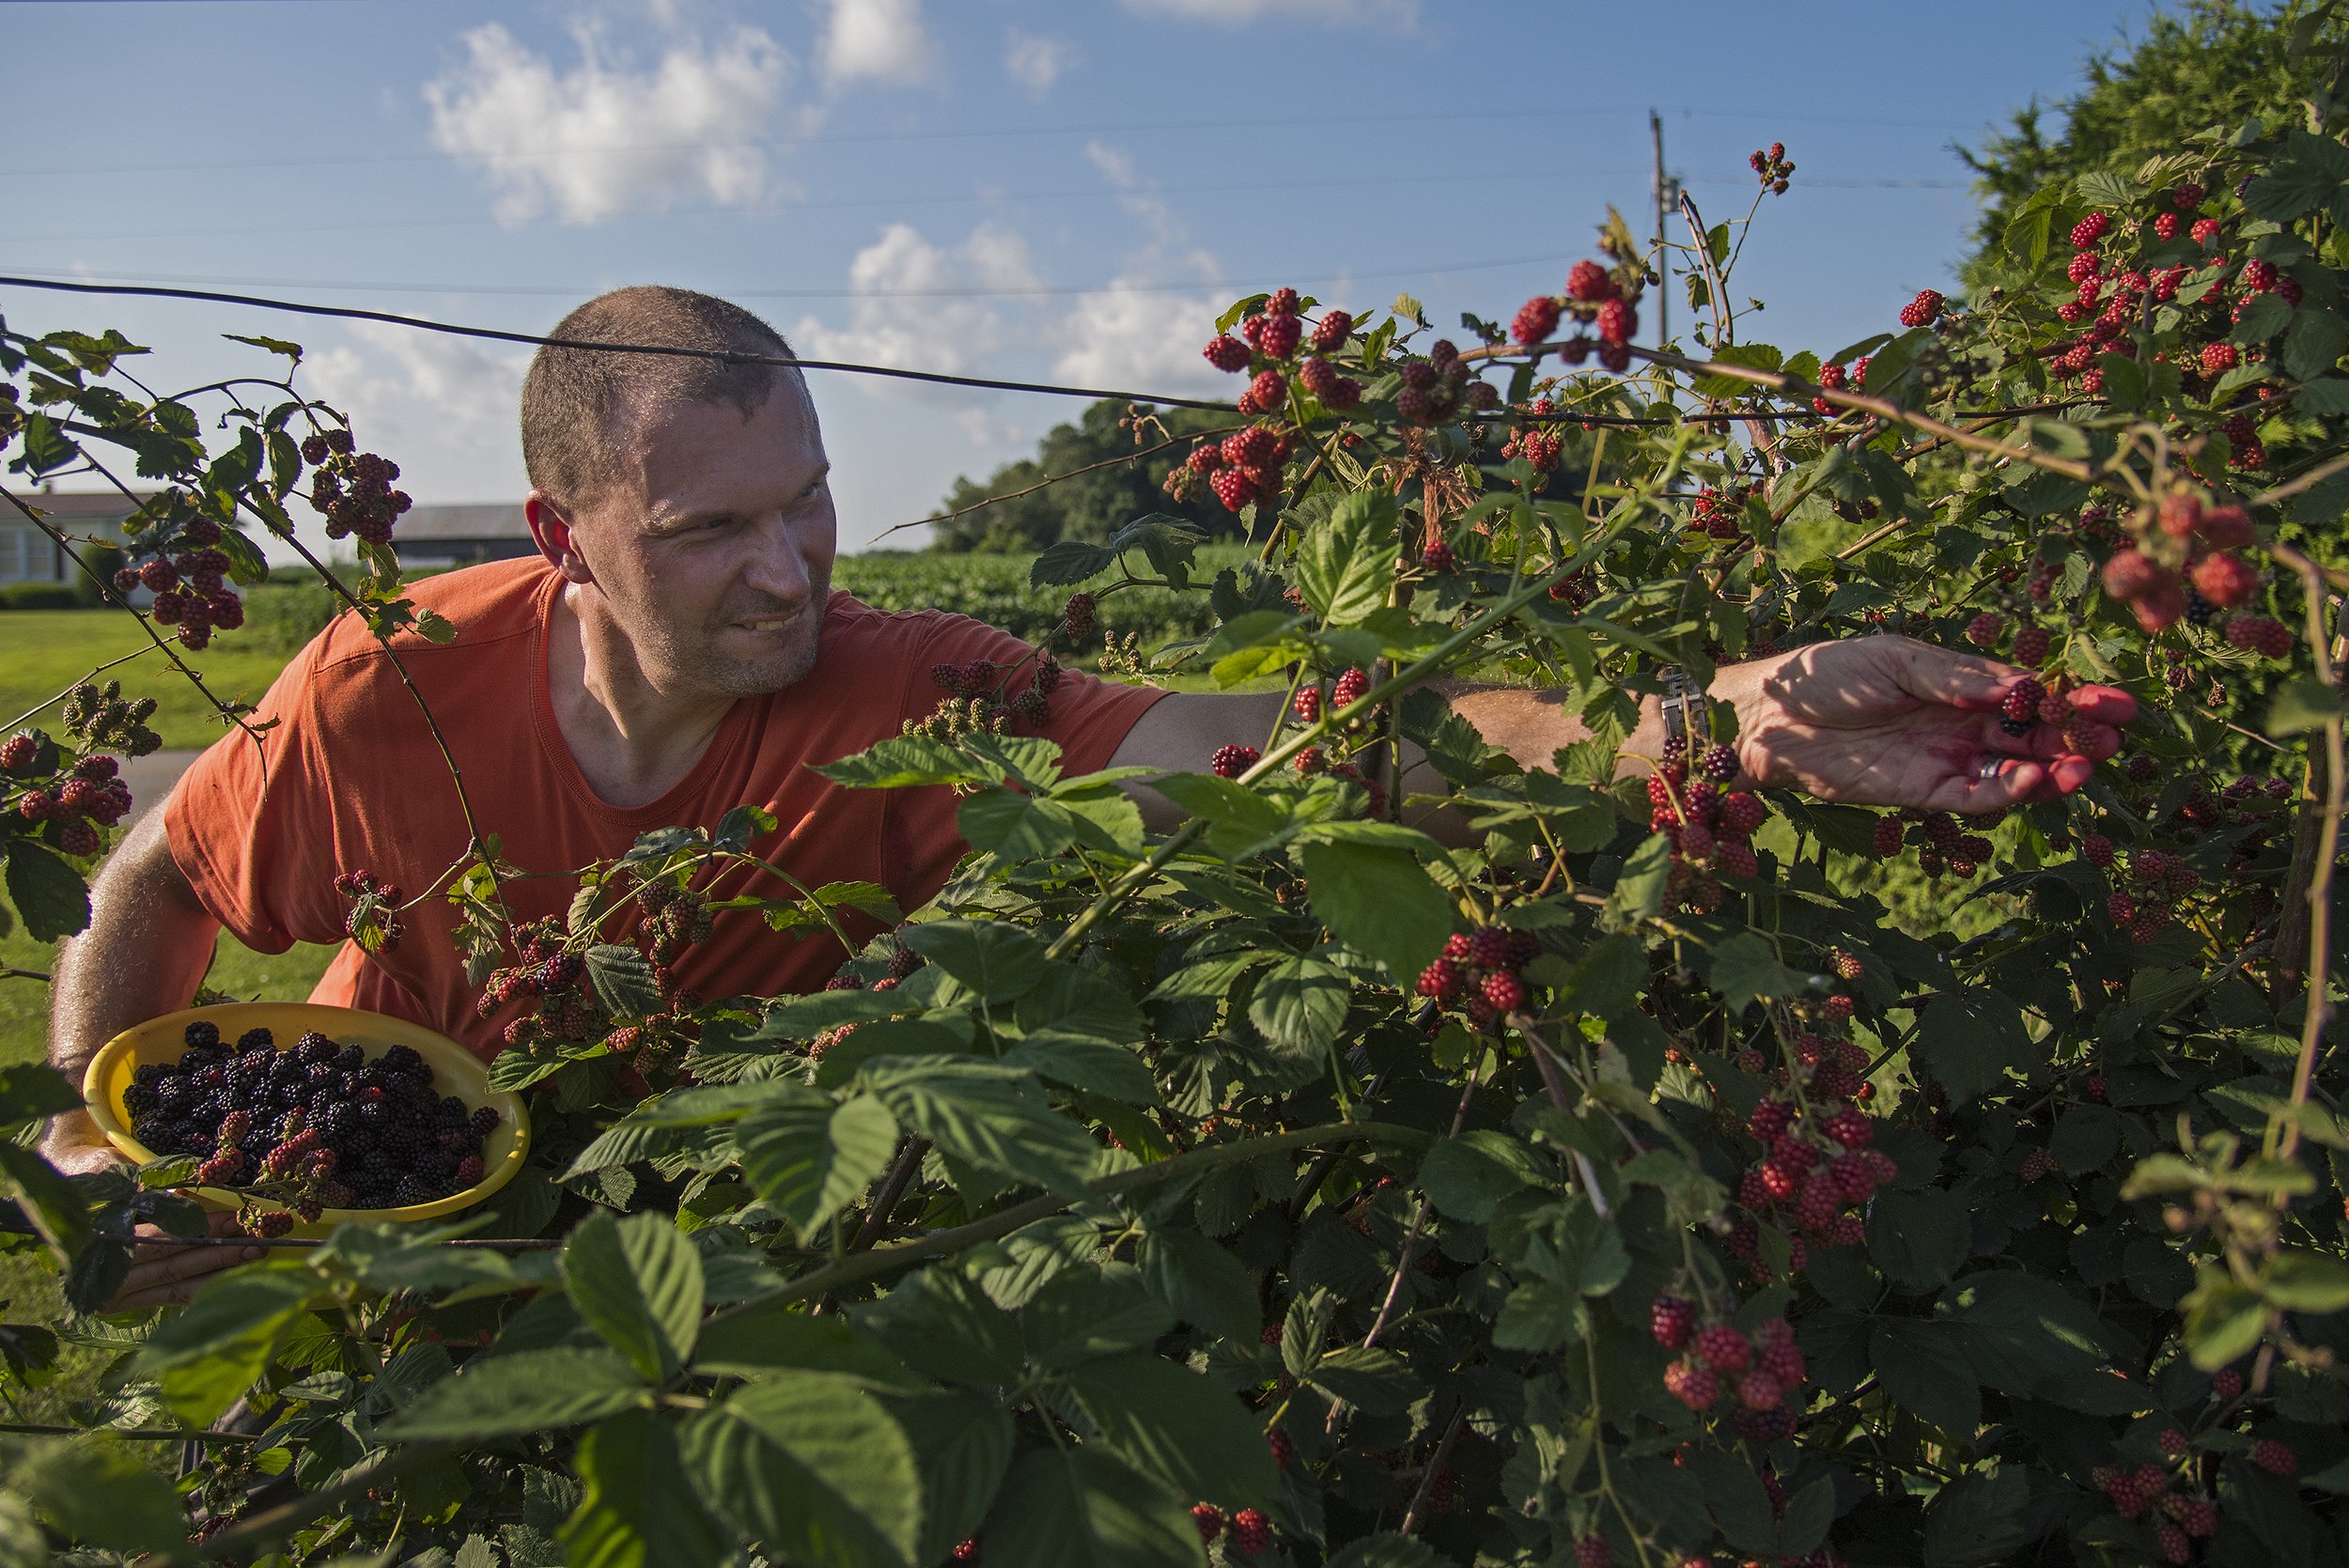  As beads of sweat formed on his face, Sam Johnson of Portersville picked tame blackberries with the assistance of his wife of nearly 25 years, Stacey Johnson, on July 6 outside their Portersville home in Indiana. Sam said tame blackberries, as oppos